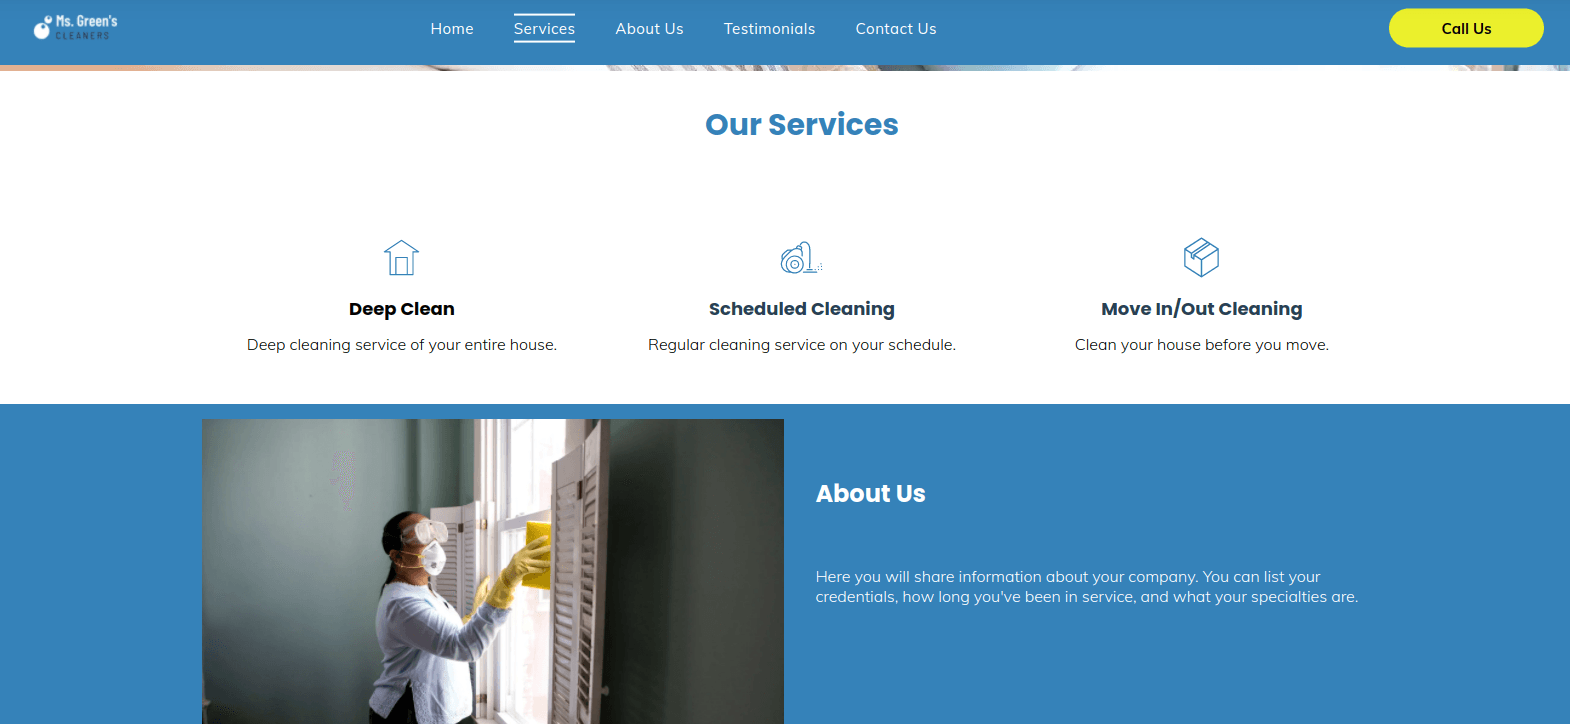 a man is cleaning a door with yellow gloves on a website .